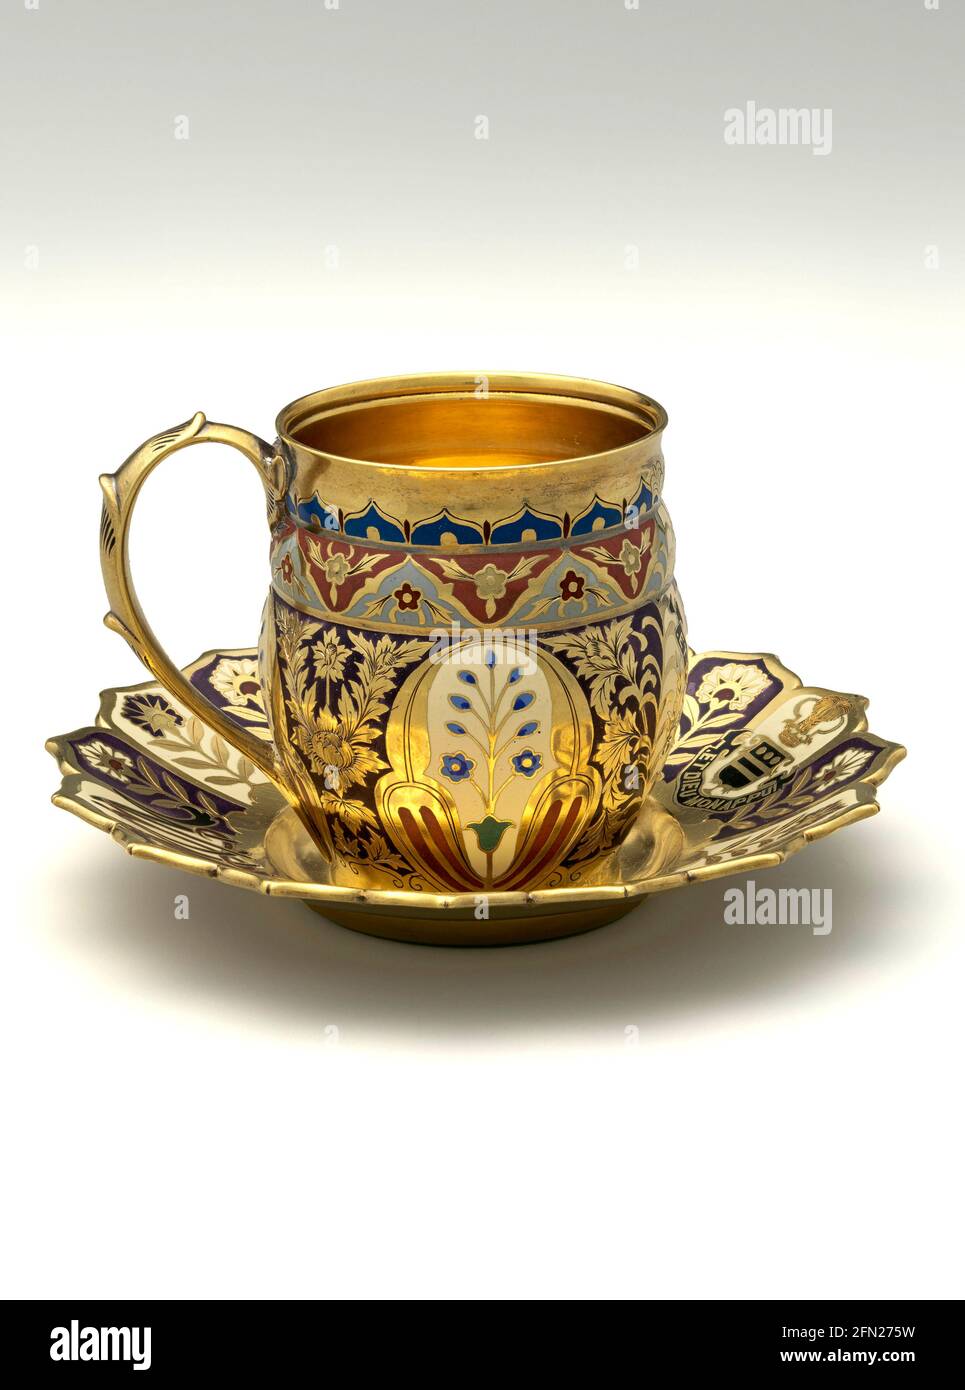 Cup - from the Mackay Service 1878 by Tiffany & Co. These gilded and enameled cups and saucers are part of one of the most renowned and lavish dinner services ever created in America Stock Photo